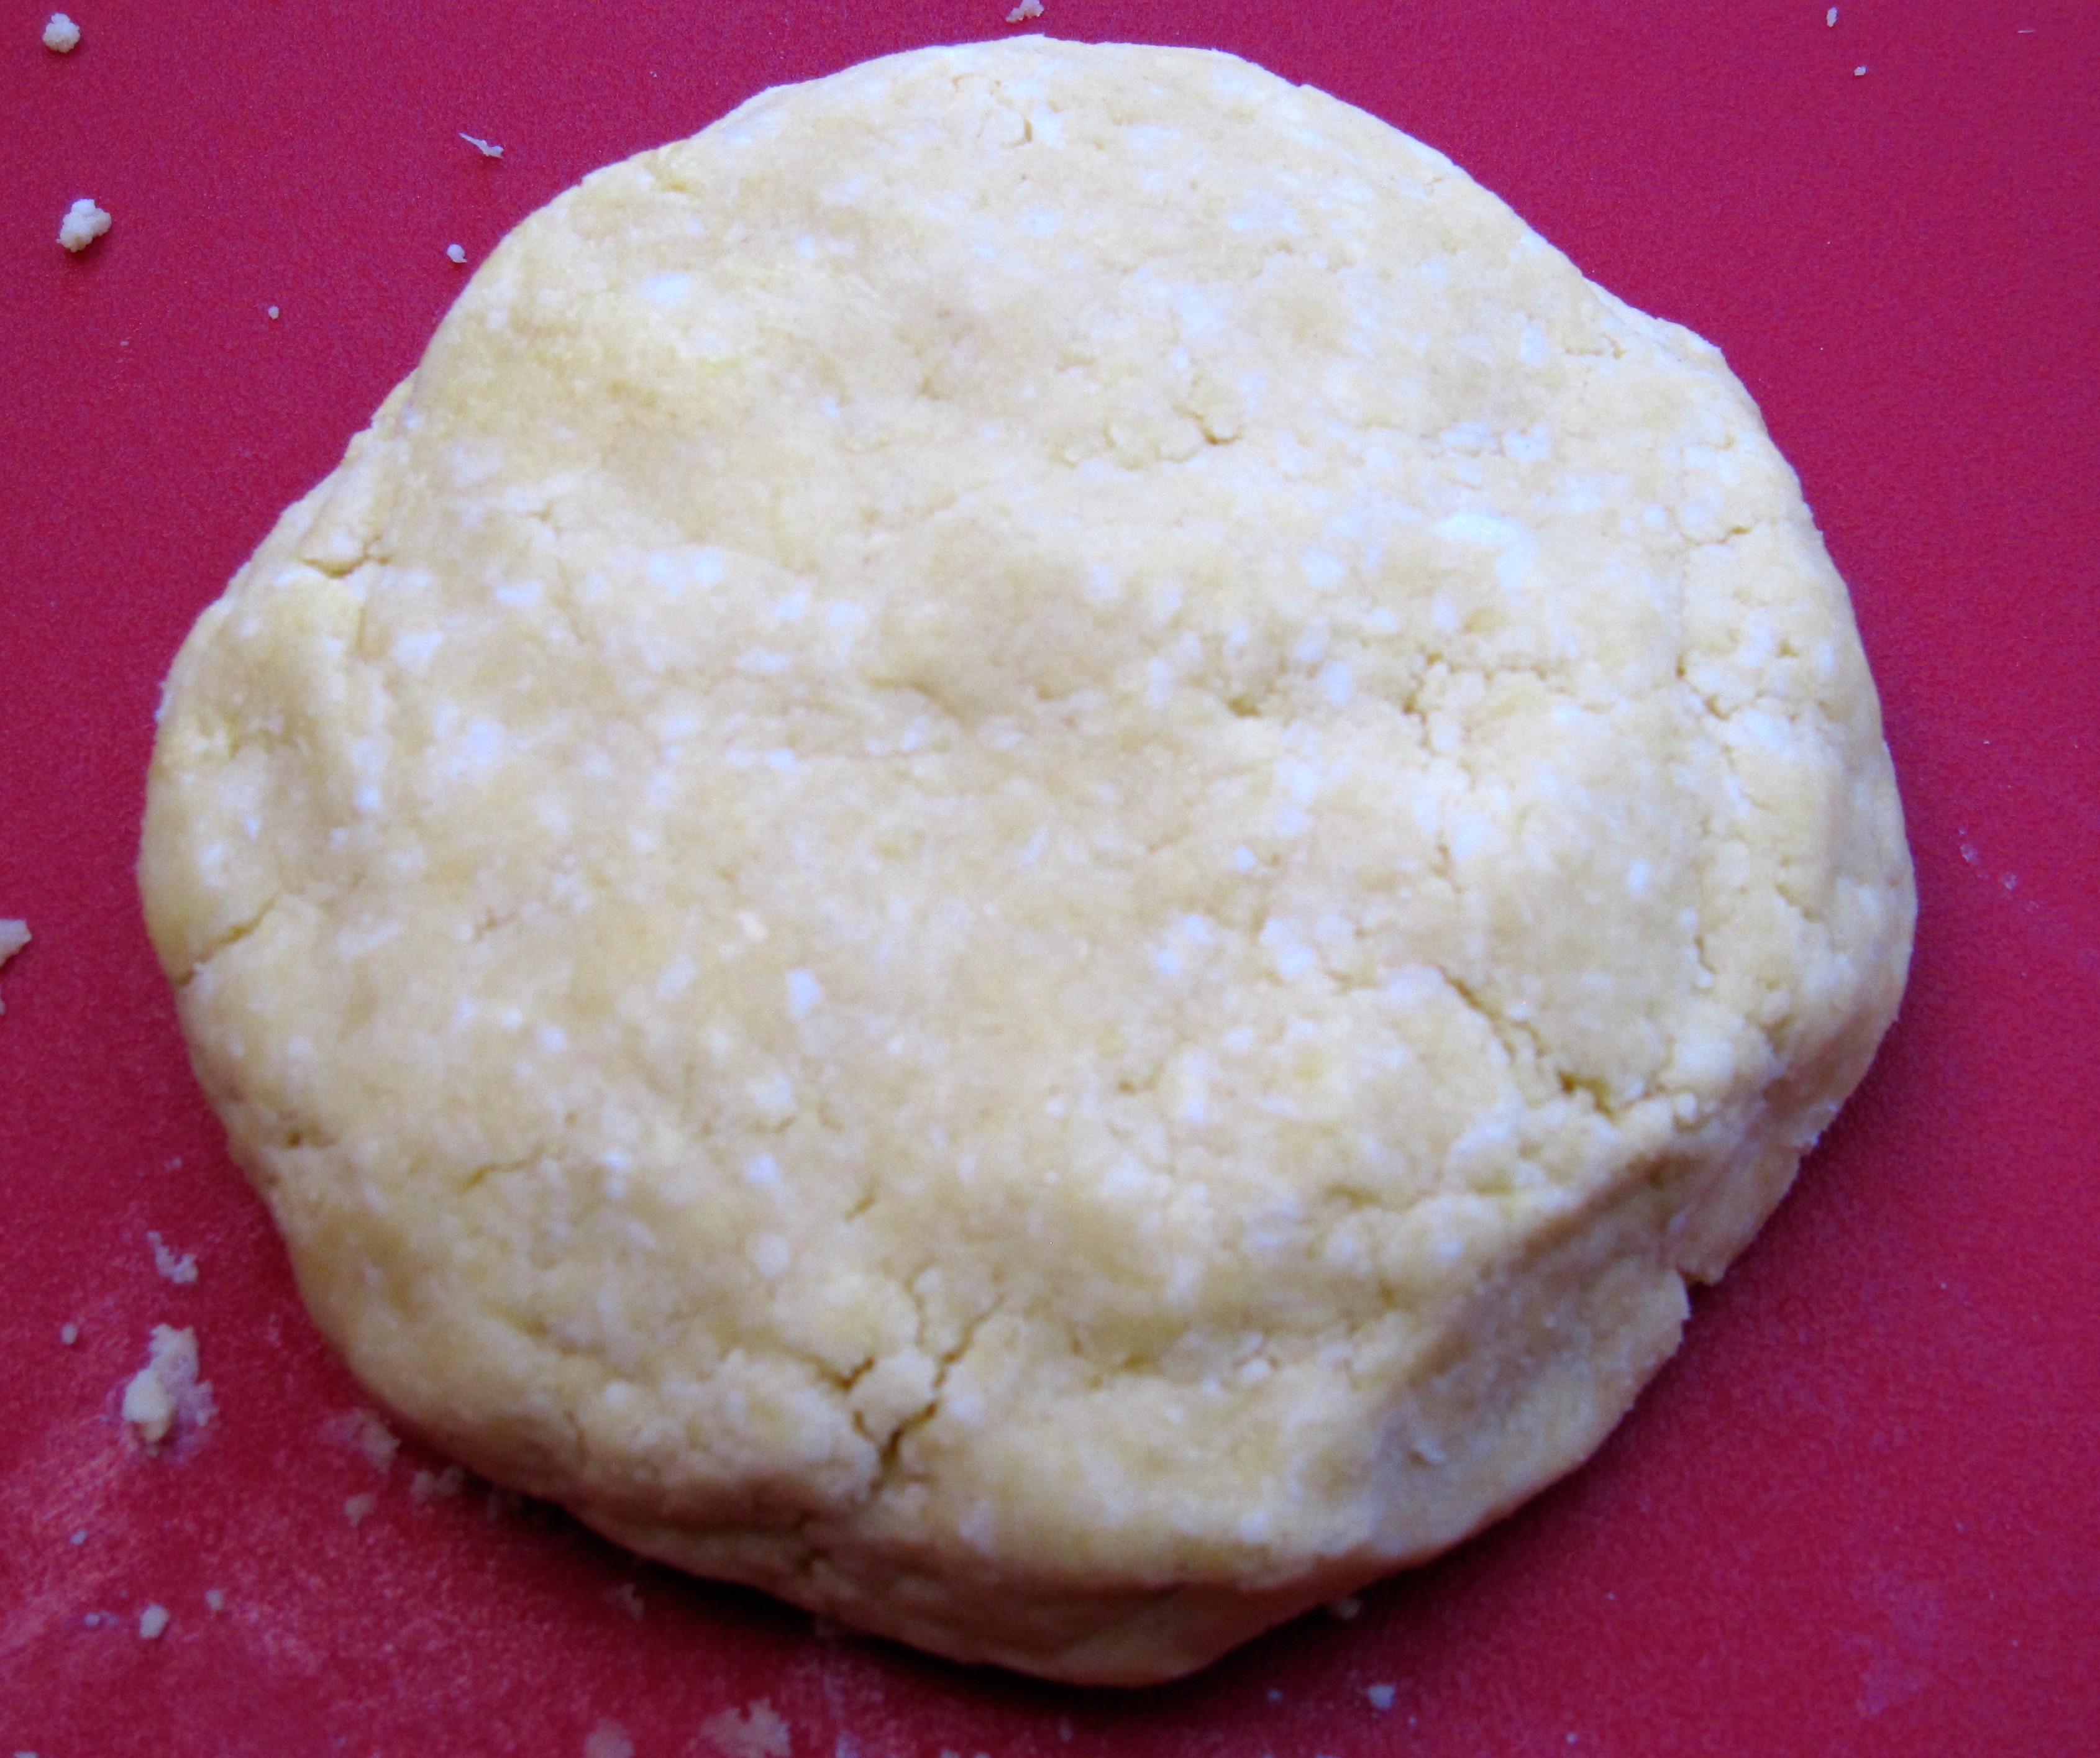 Dorie Greenspan's tart dough in a disc after 3 hours of refrigeration.